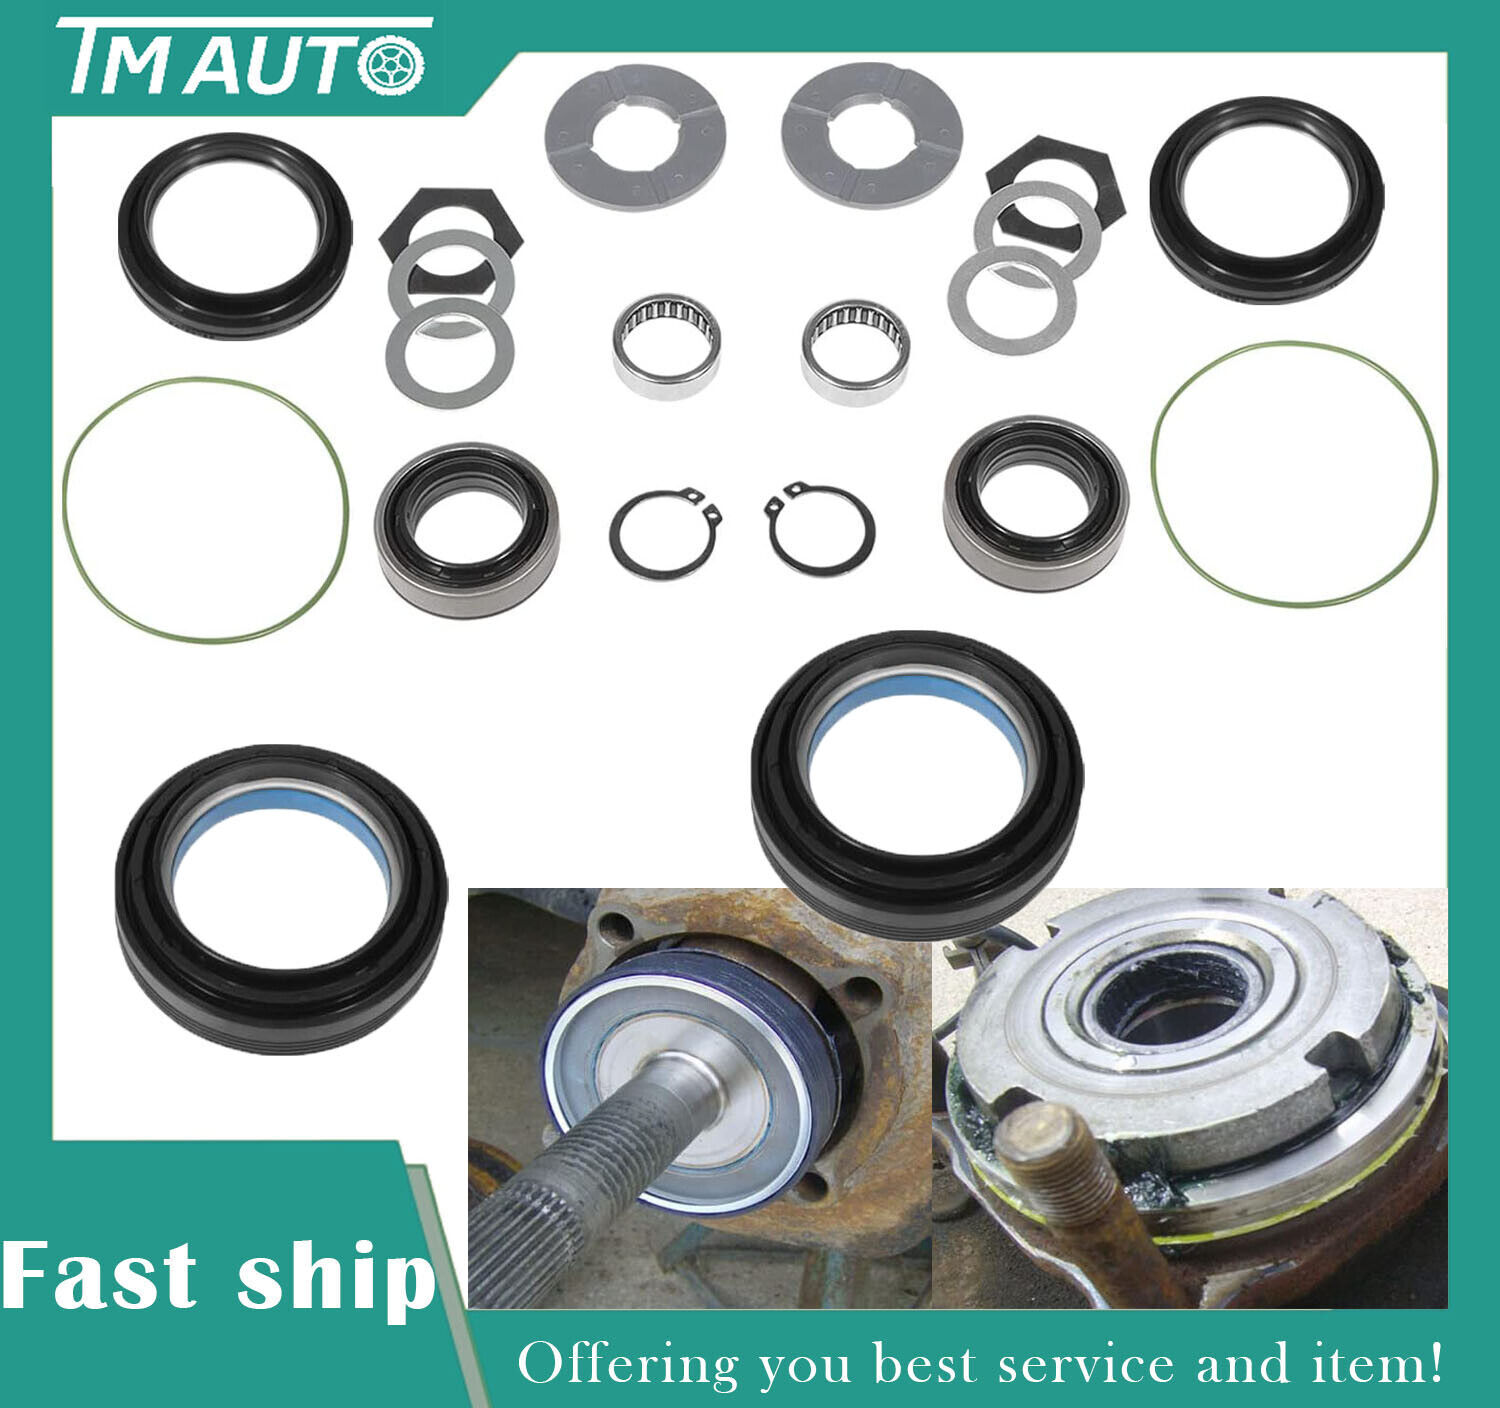 20Pcs Front Outer Axle Bearing Seal Knuckle Tube Dust Seal Kit For 1998-04 Ford